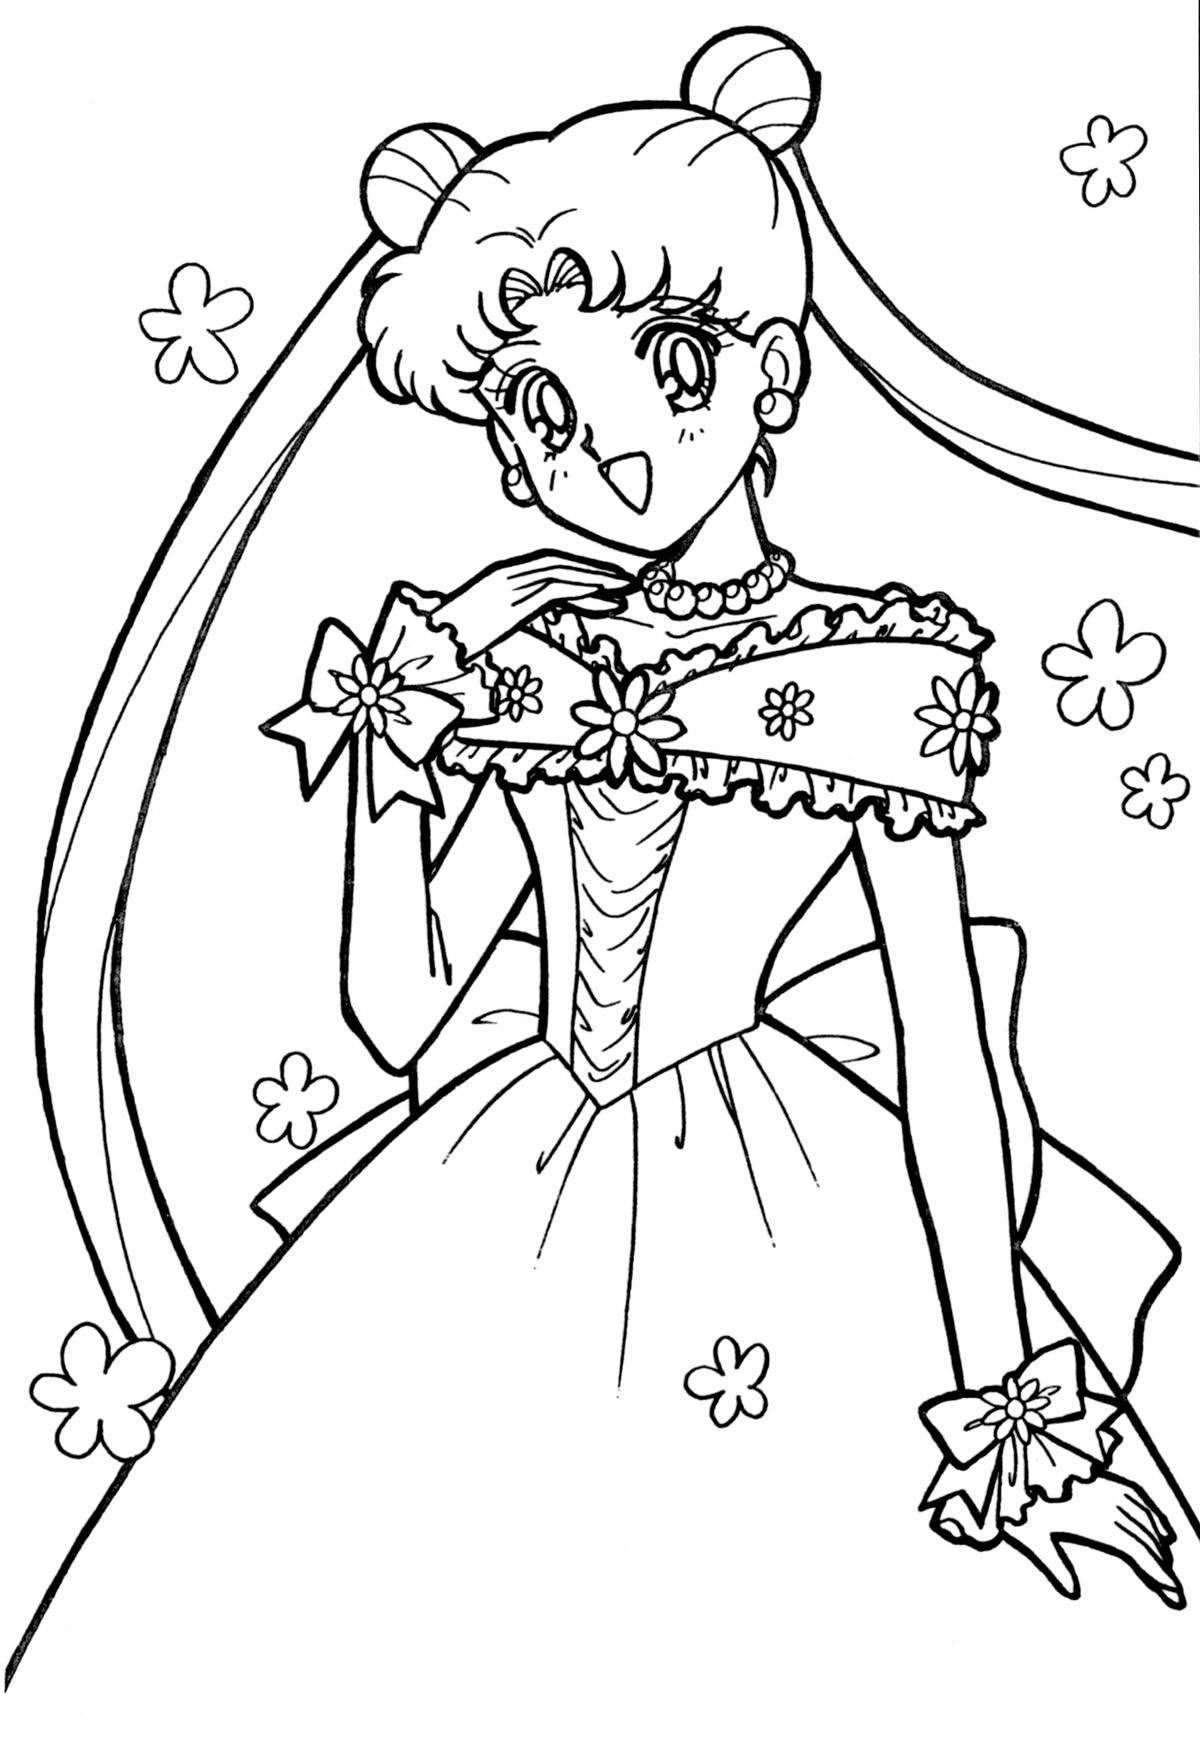 Great coloring book for girls sailor moon